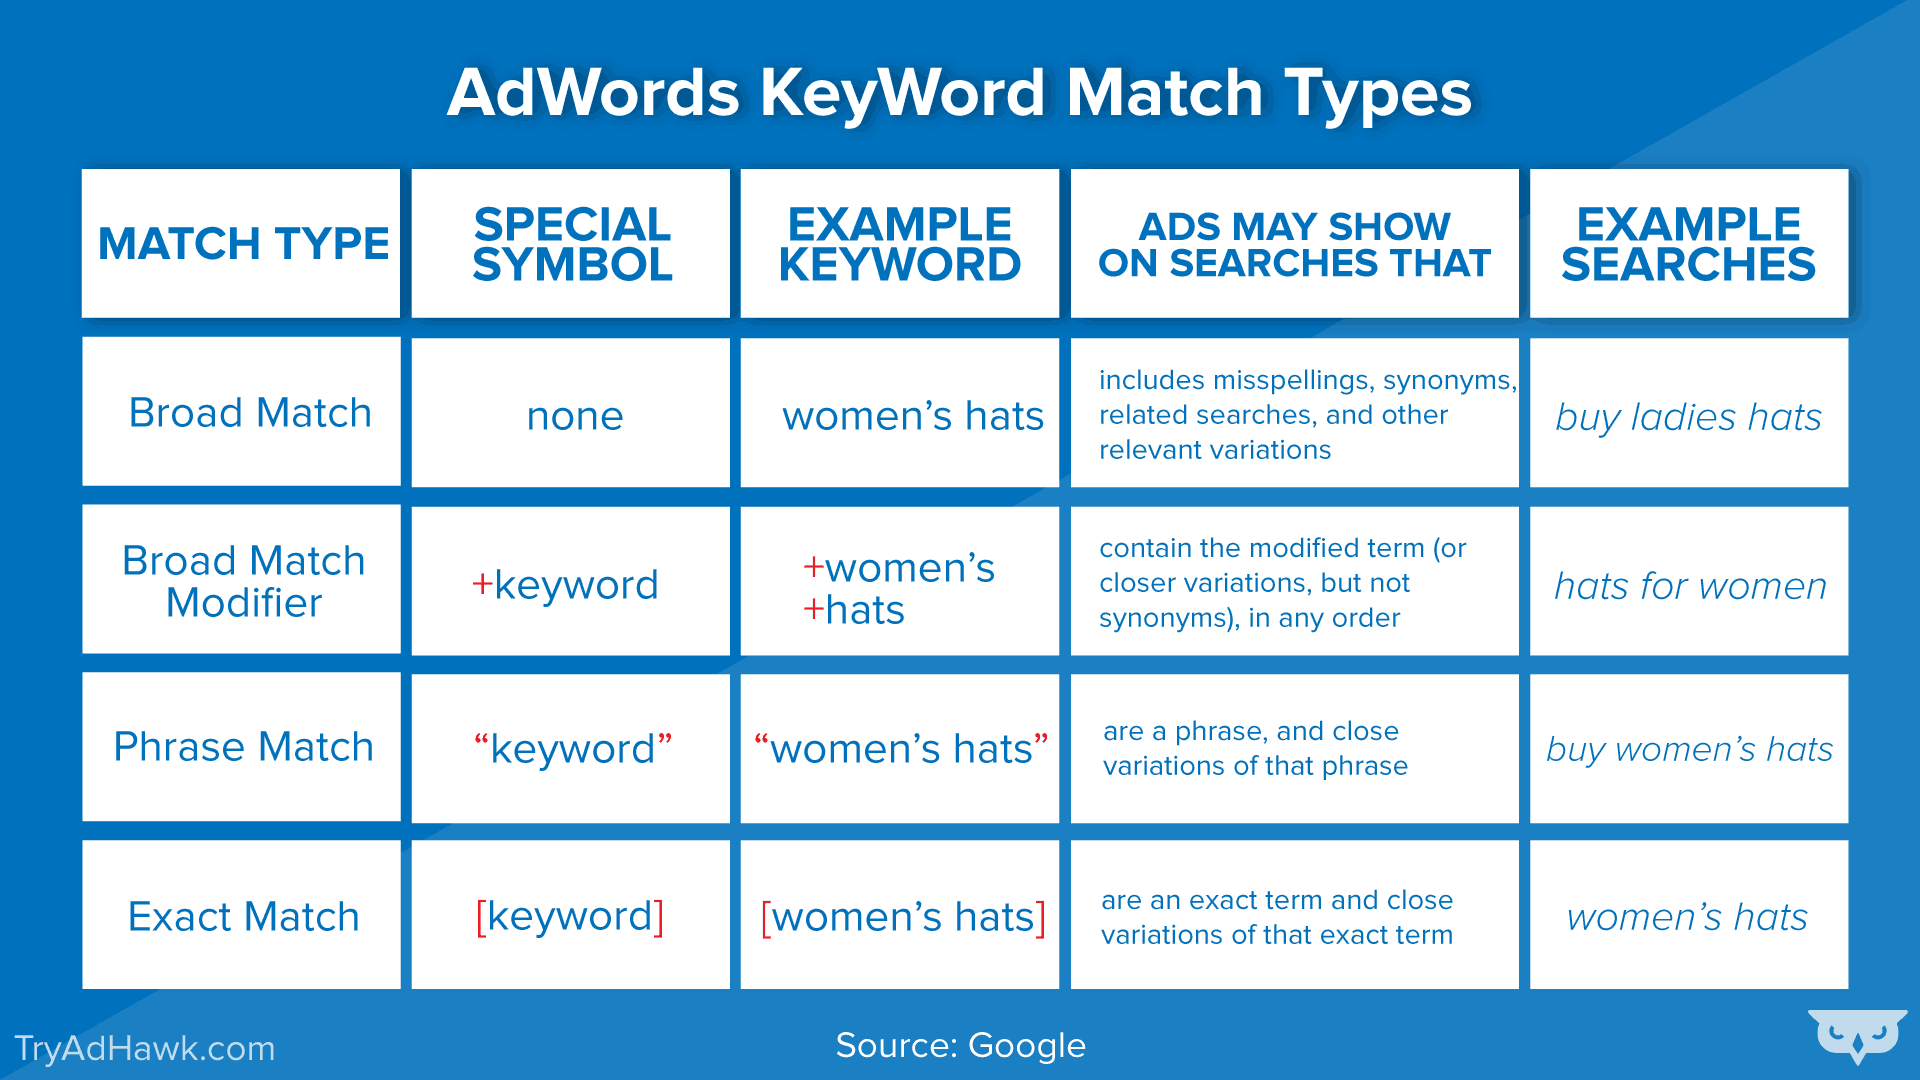 AdWords keyword match types compared to the broad match modifier.